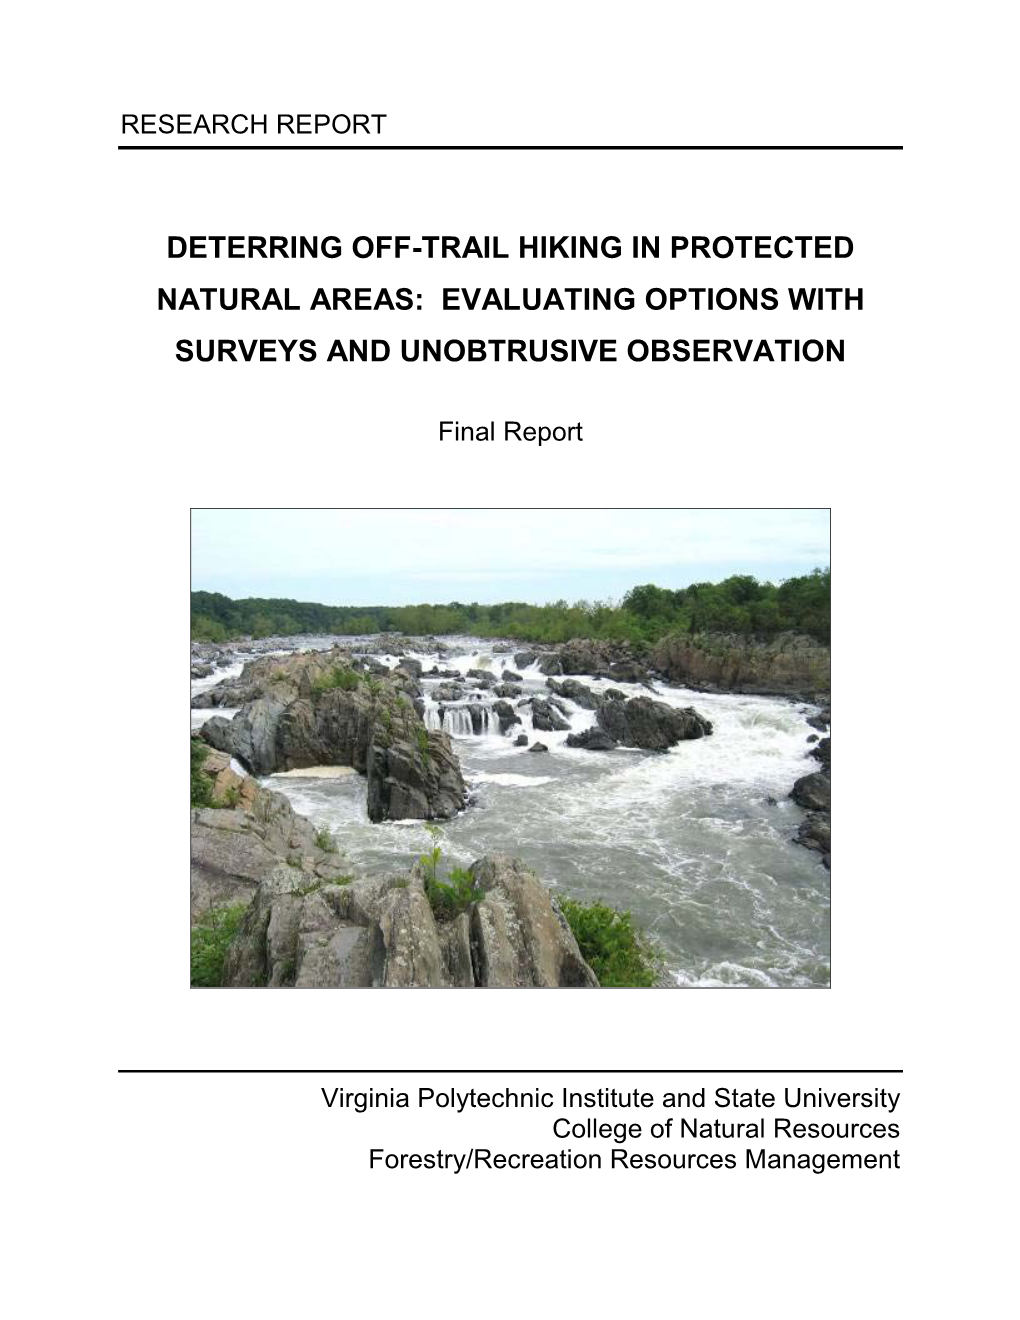 Deterring Off-Trail Hiking in Protected Natural Areas: Evaluating Options with Surveys and Unobtrusive Observation